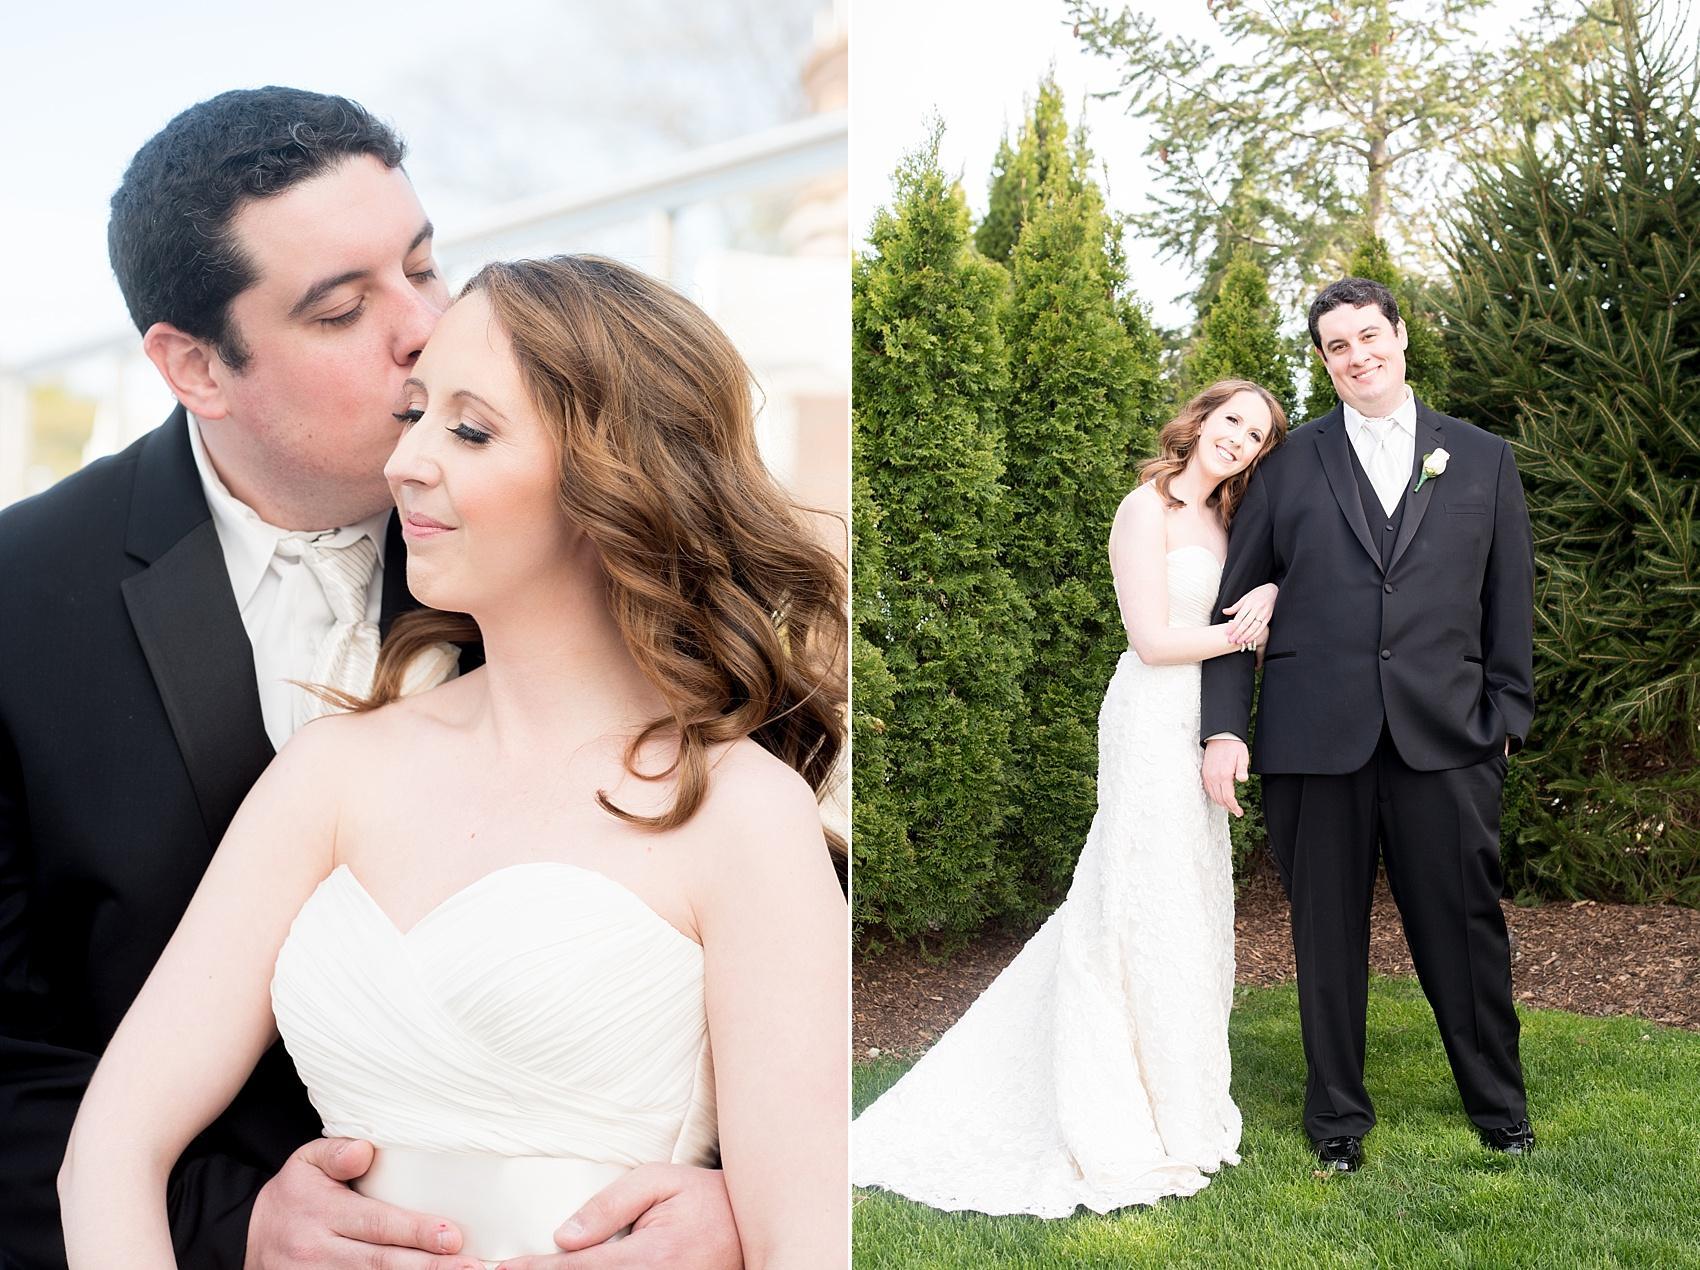 Photos by Mikkel Paige Photography for a wedding at Harbor Club on Long Island. Bride and groom portraits by the water.